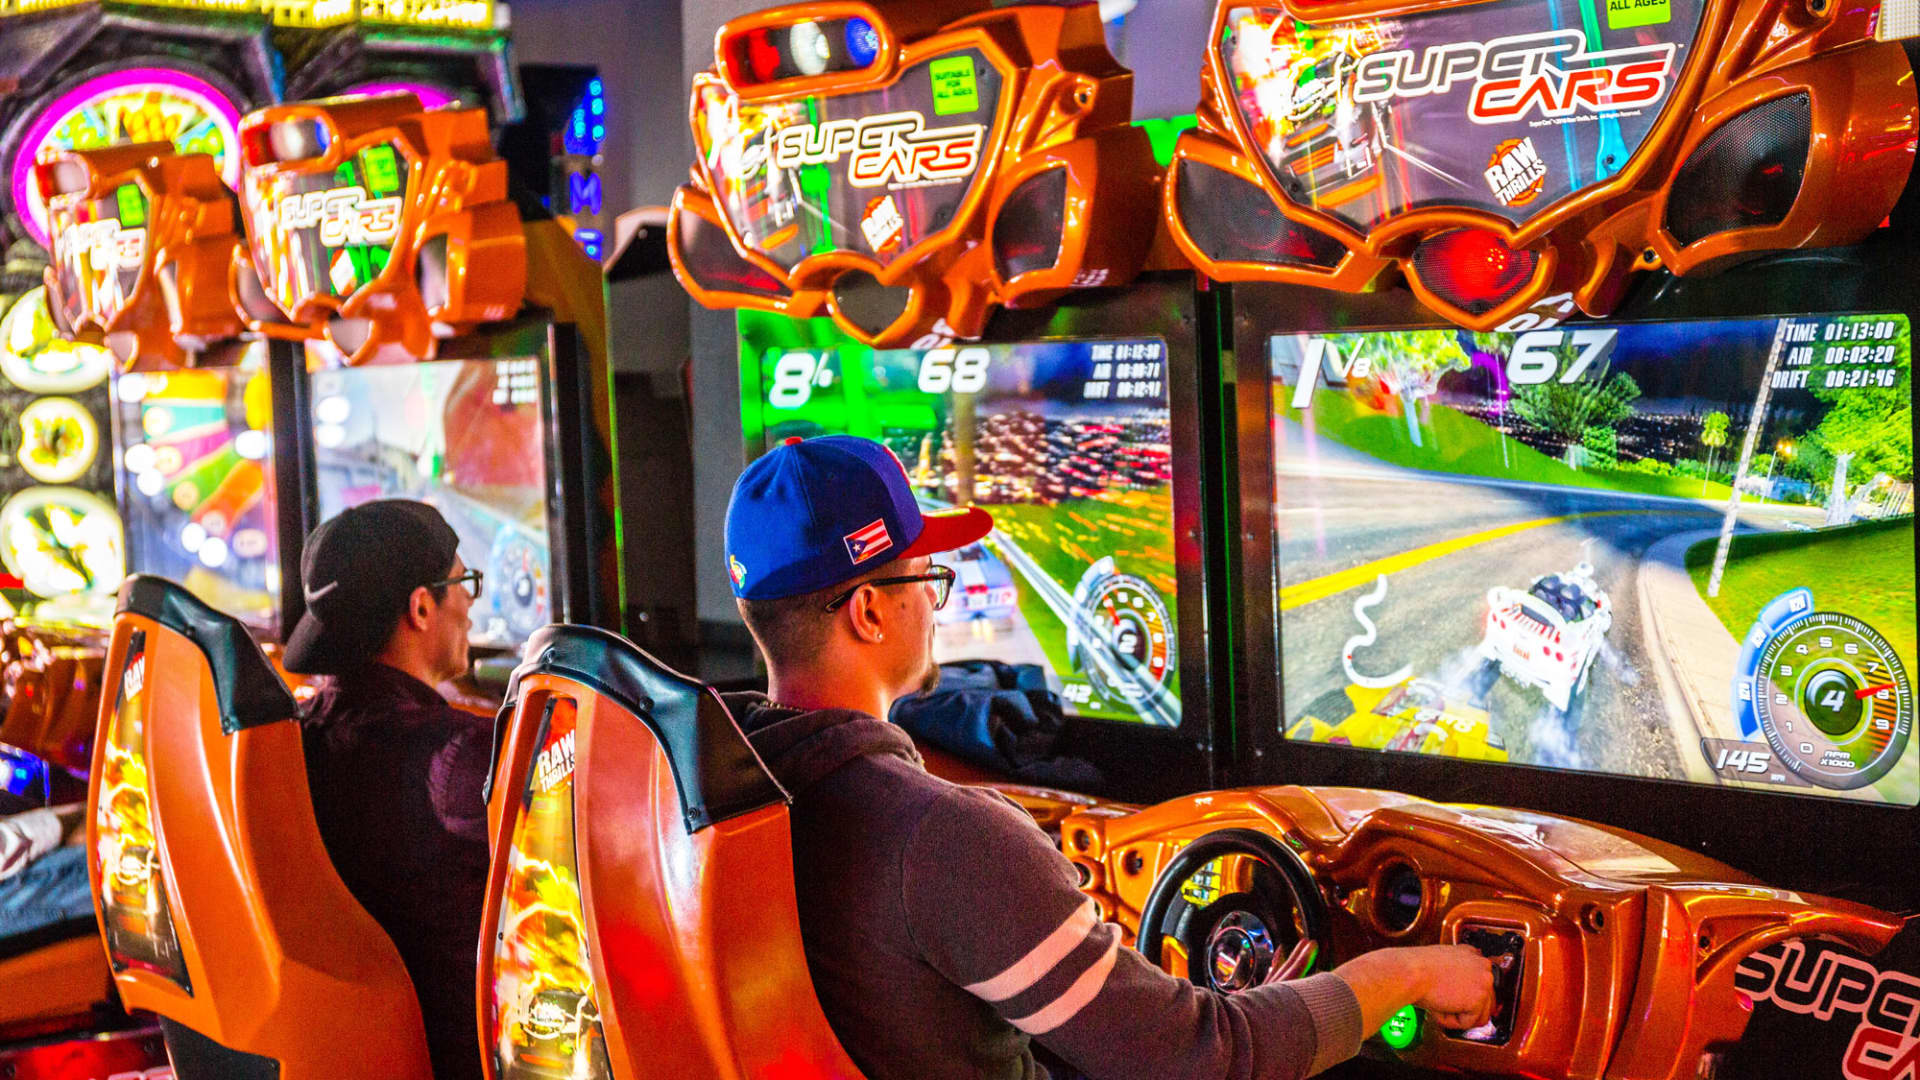 Dave & Buster’s plan to allow betting on arcade games draws scrutiny